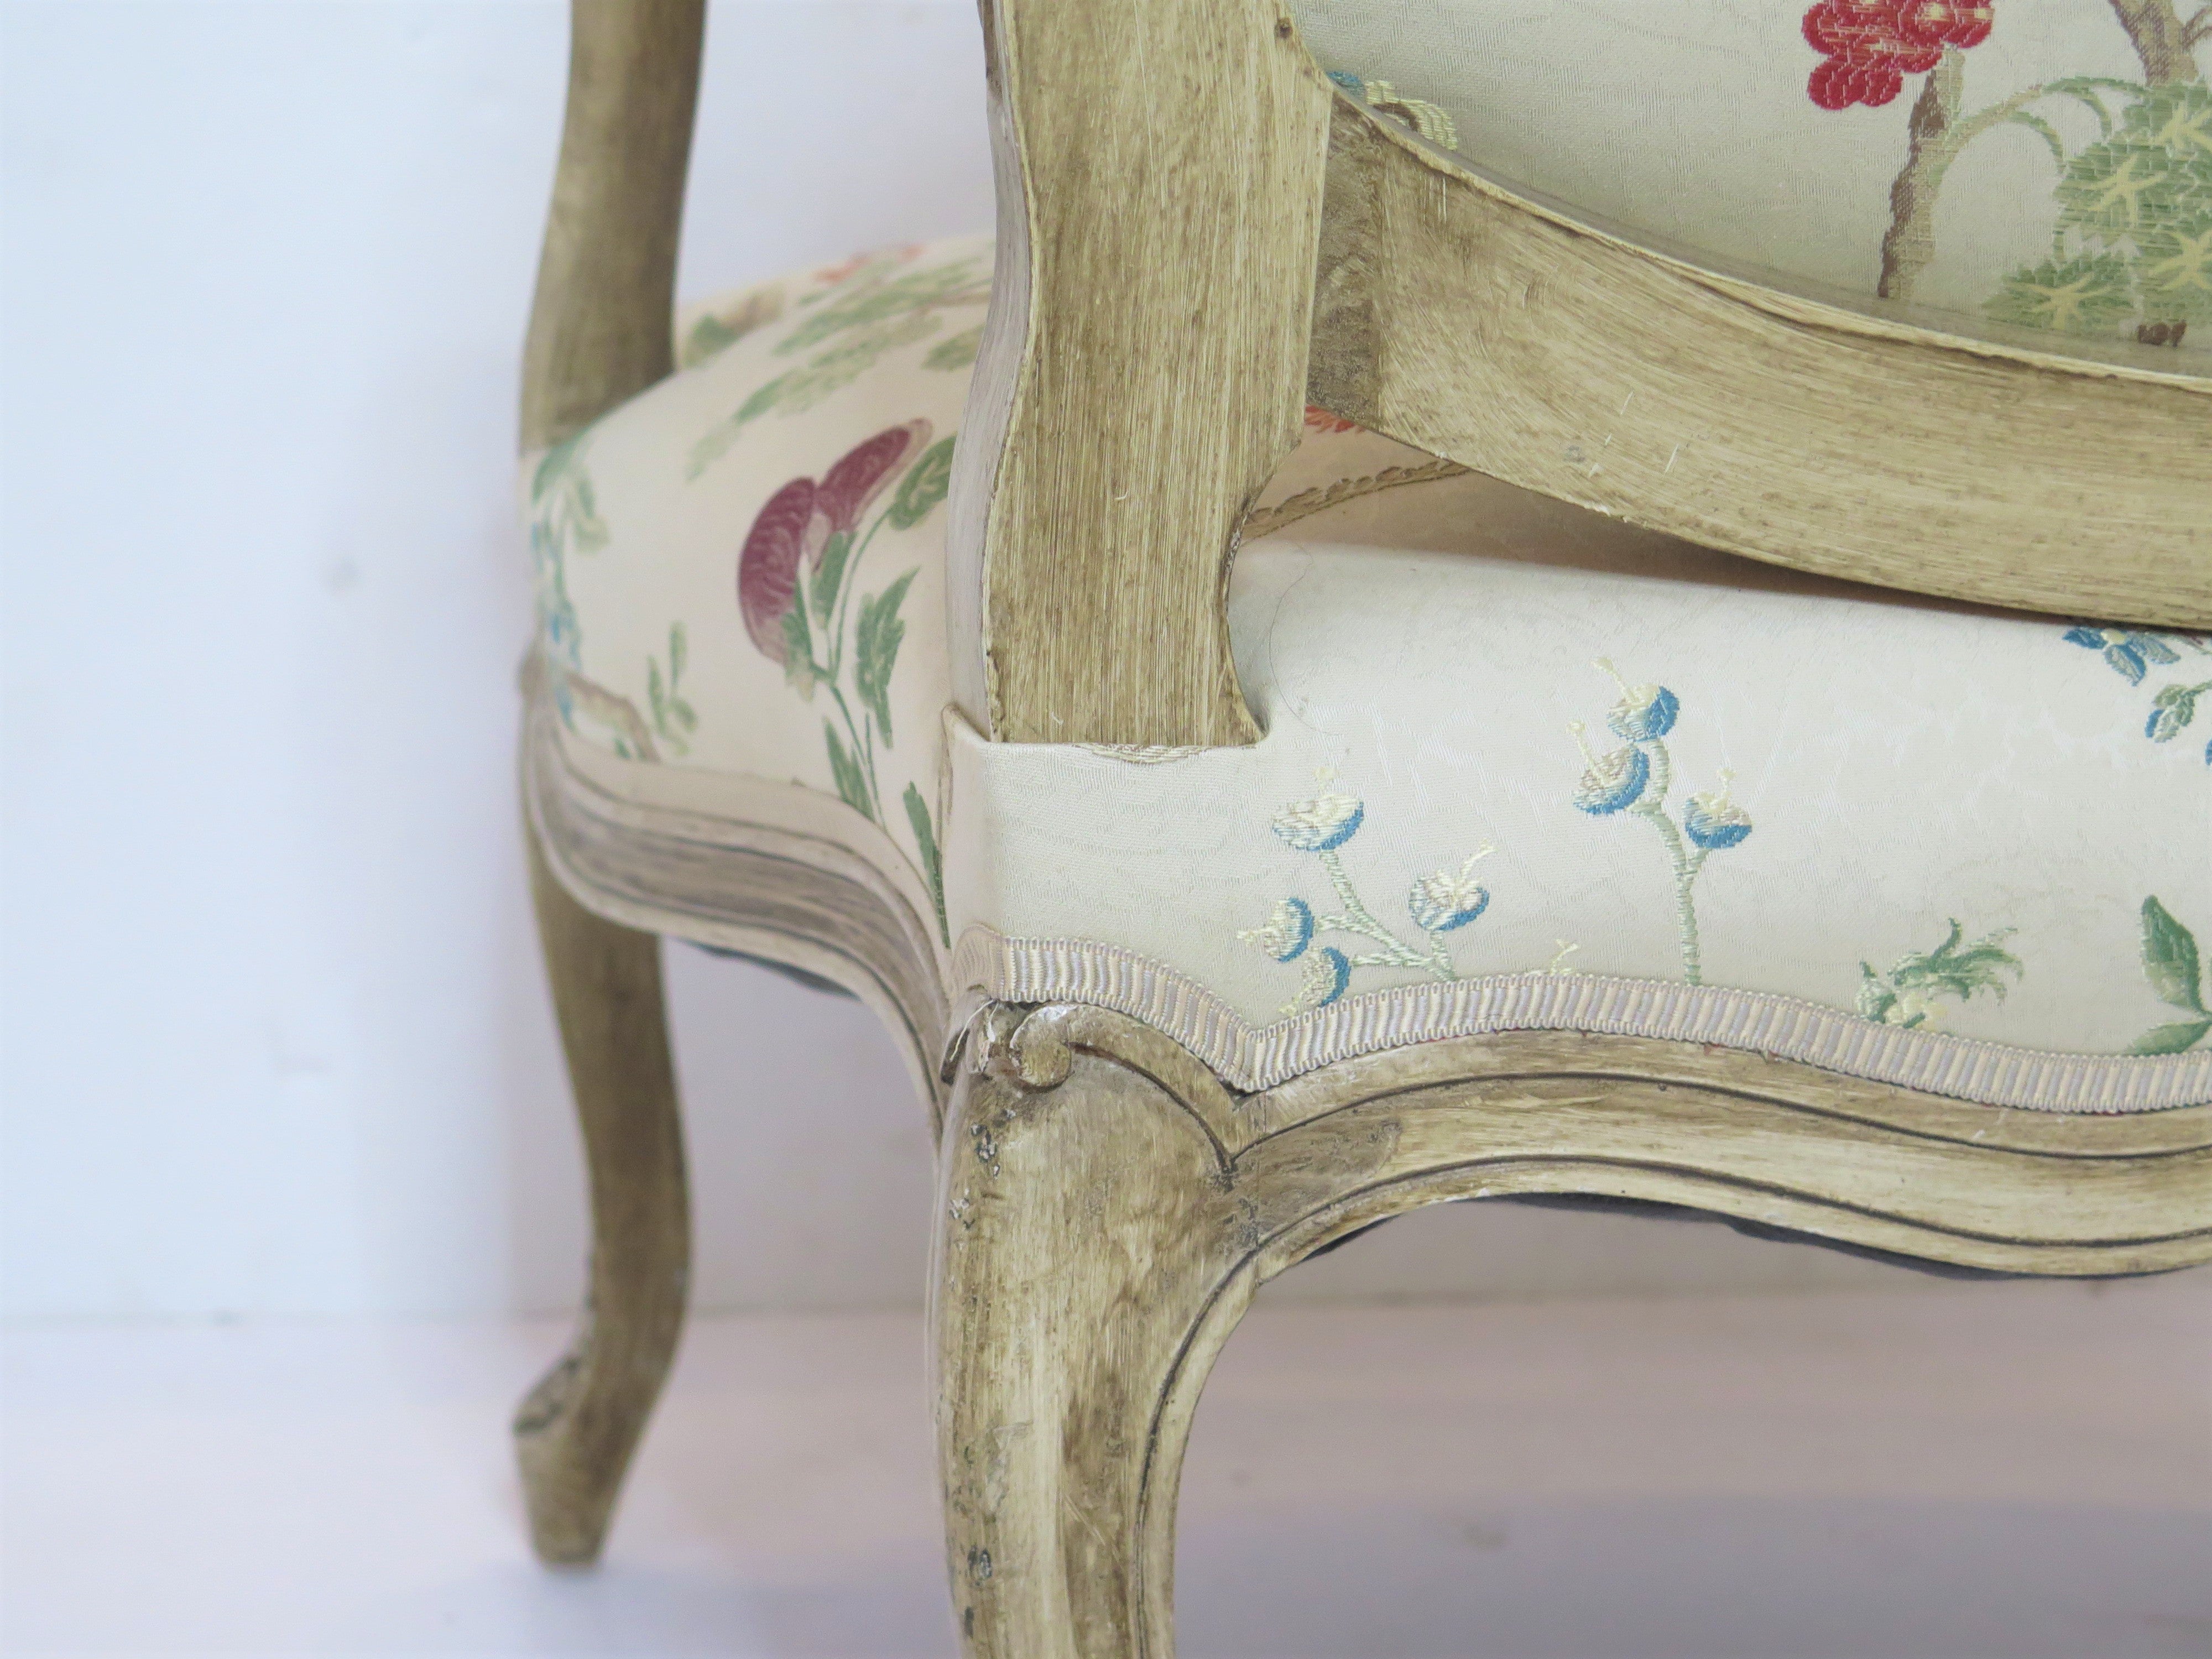 Louis XV-Style Painted Fauteuil in La Perouse by Scalamandré